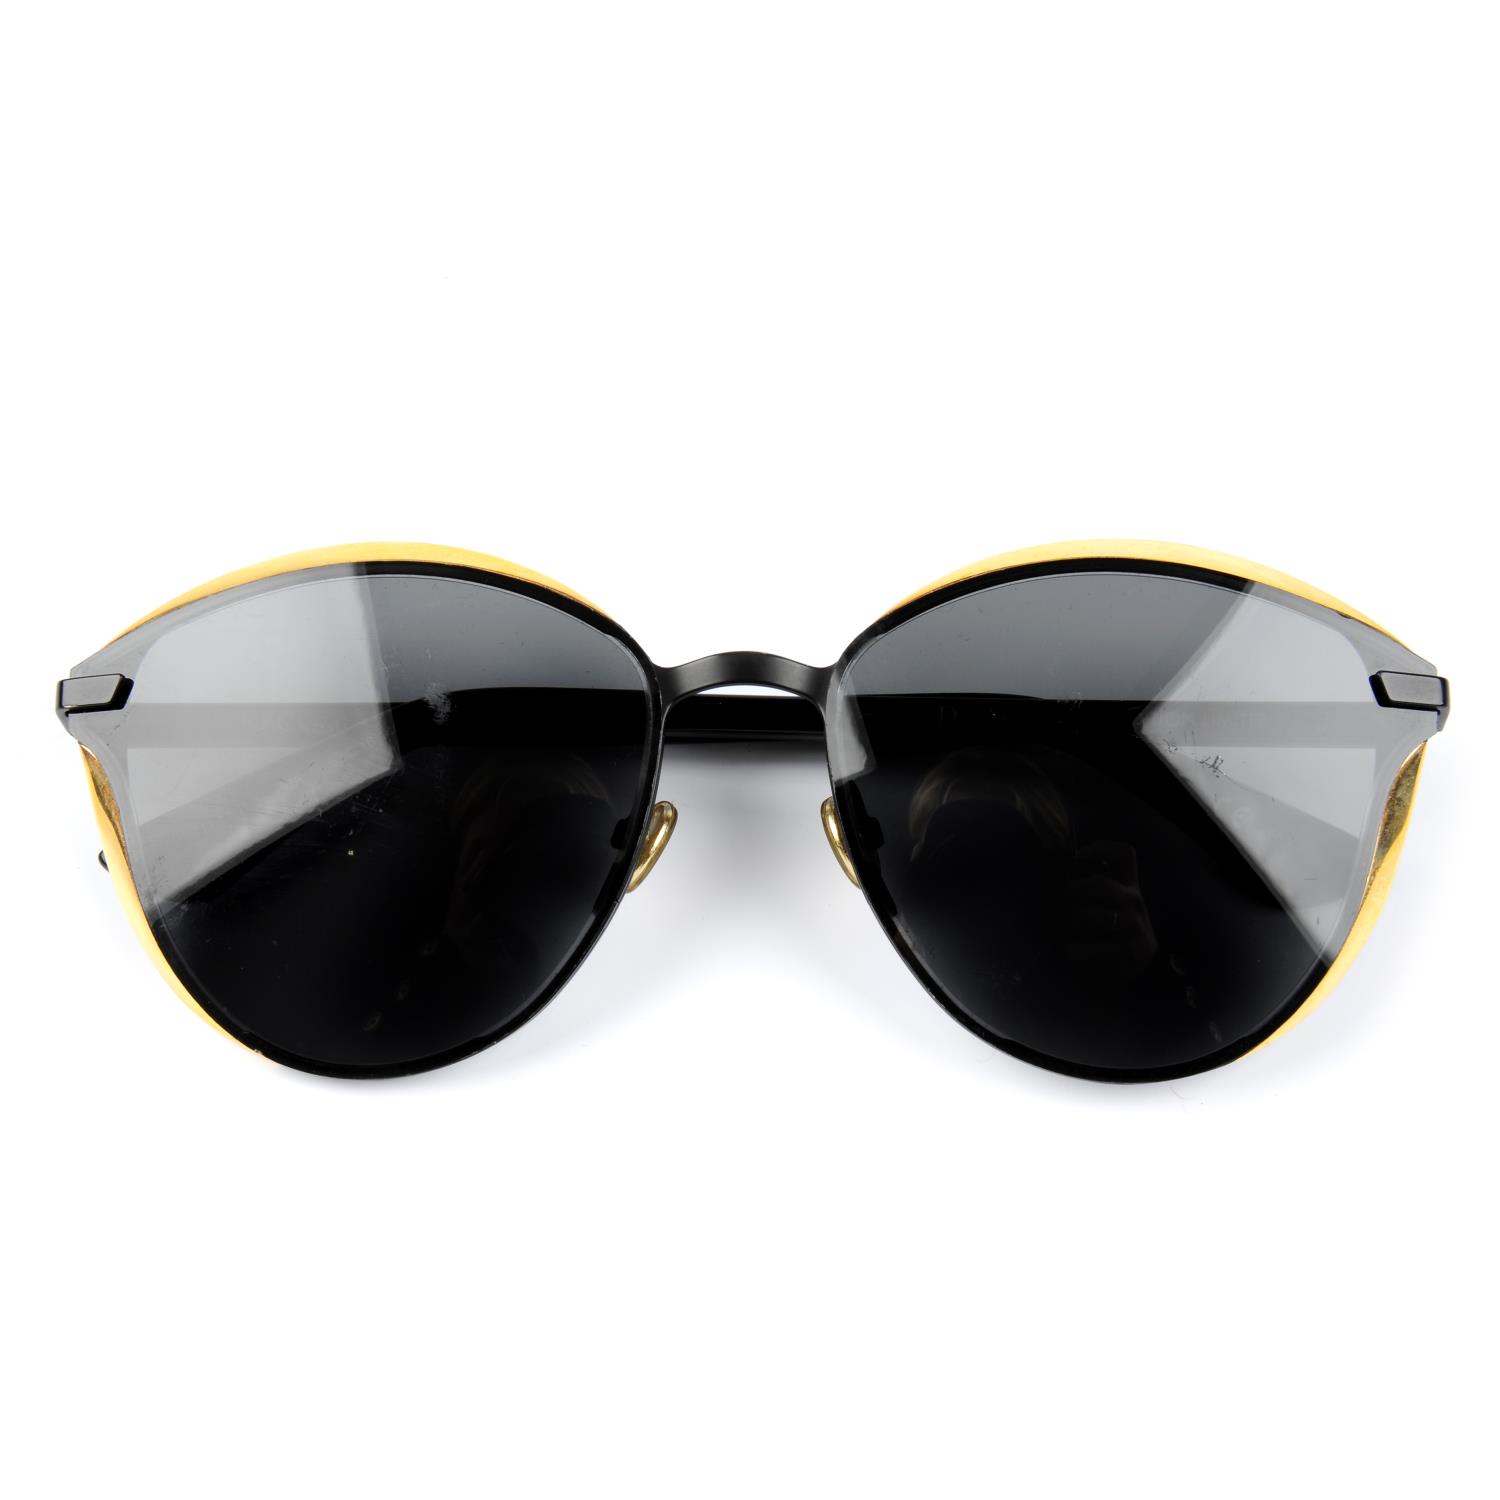 CHRISTIAN DIOR - a pair of limited edition sunglasses.